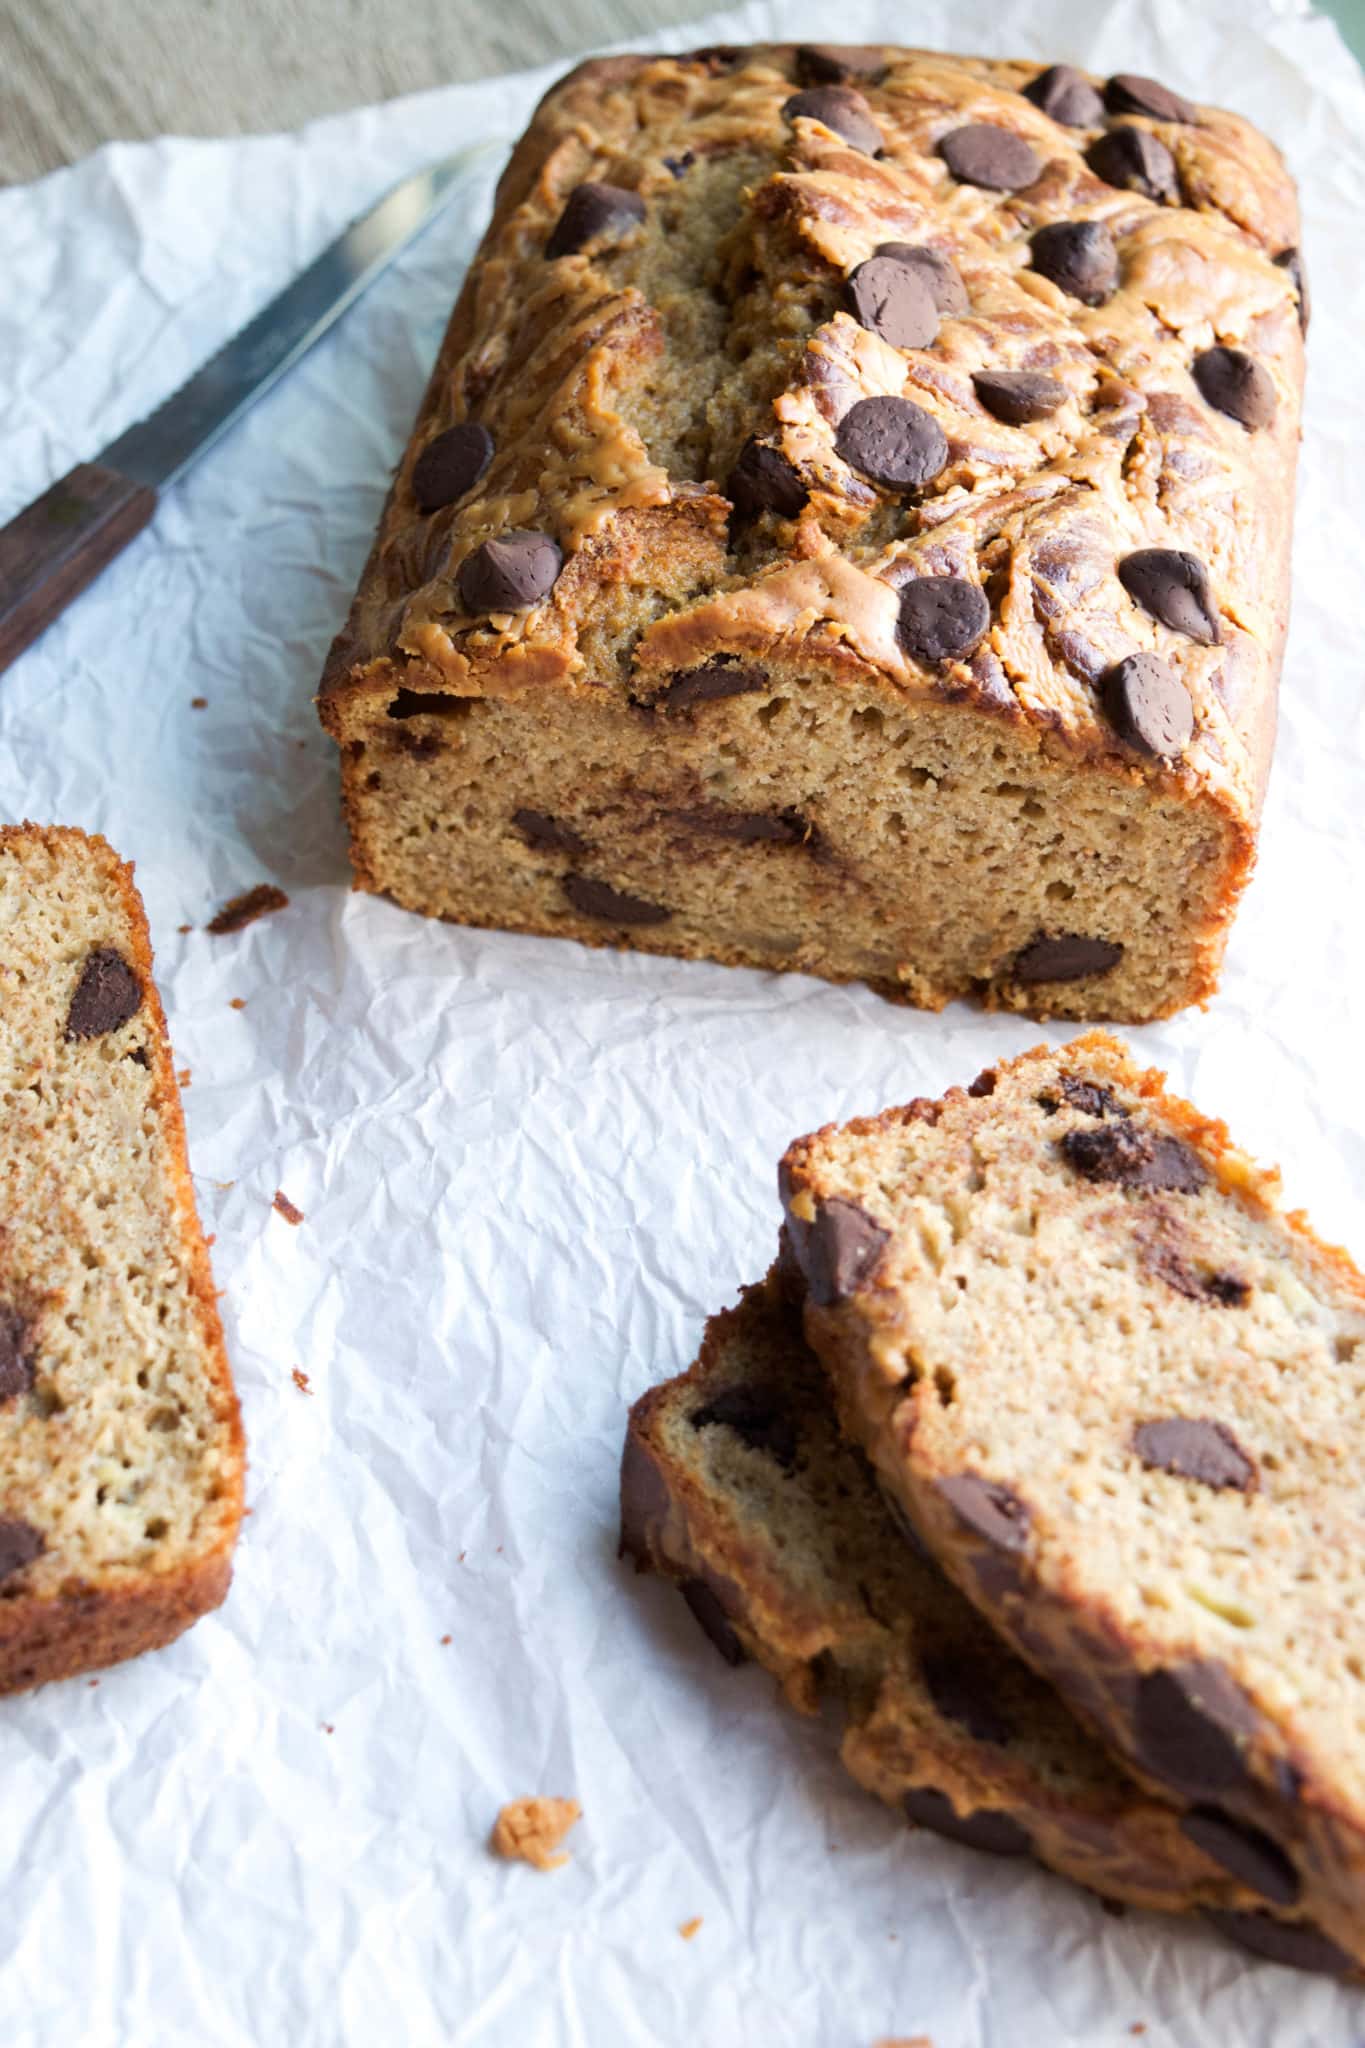 Chocolate chips meet banana bread meet peanut butter in this amazing and healthy combo.